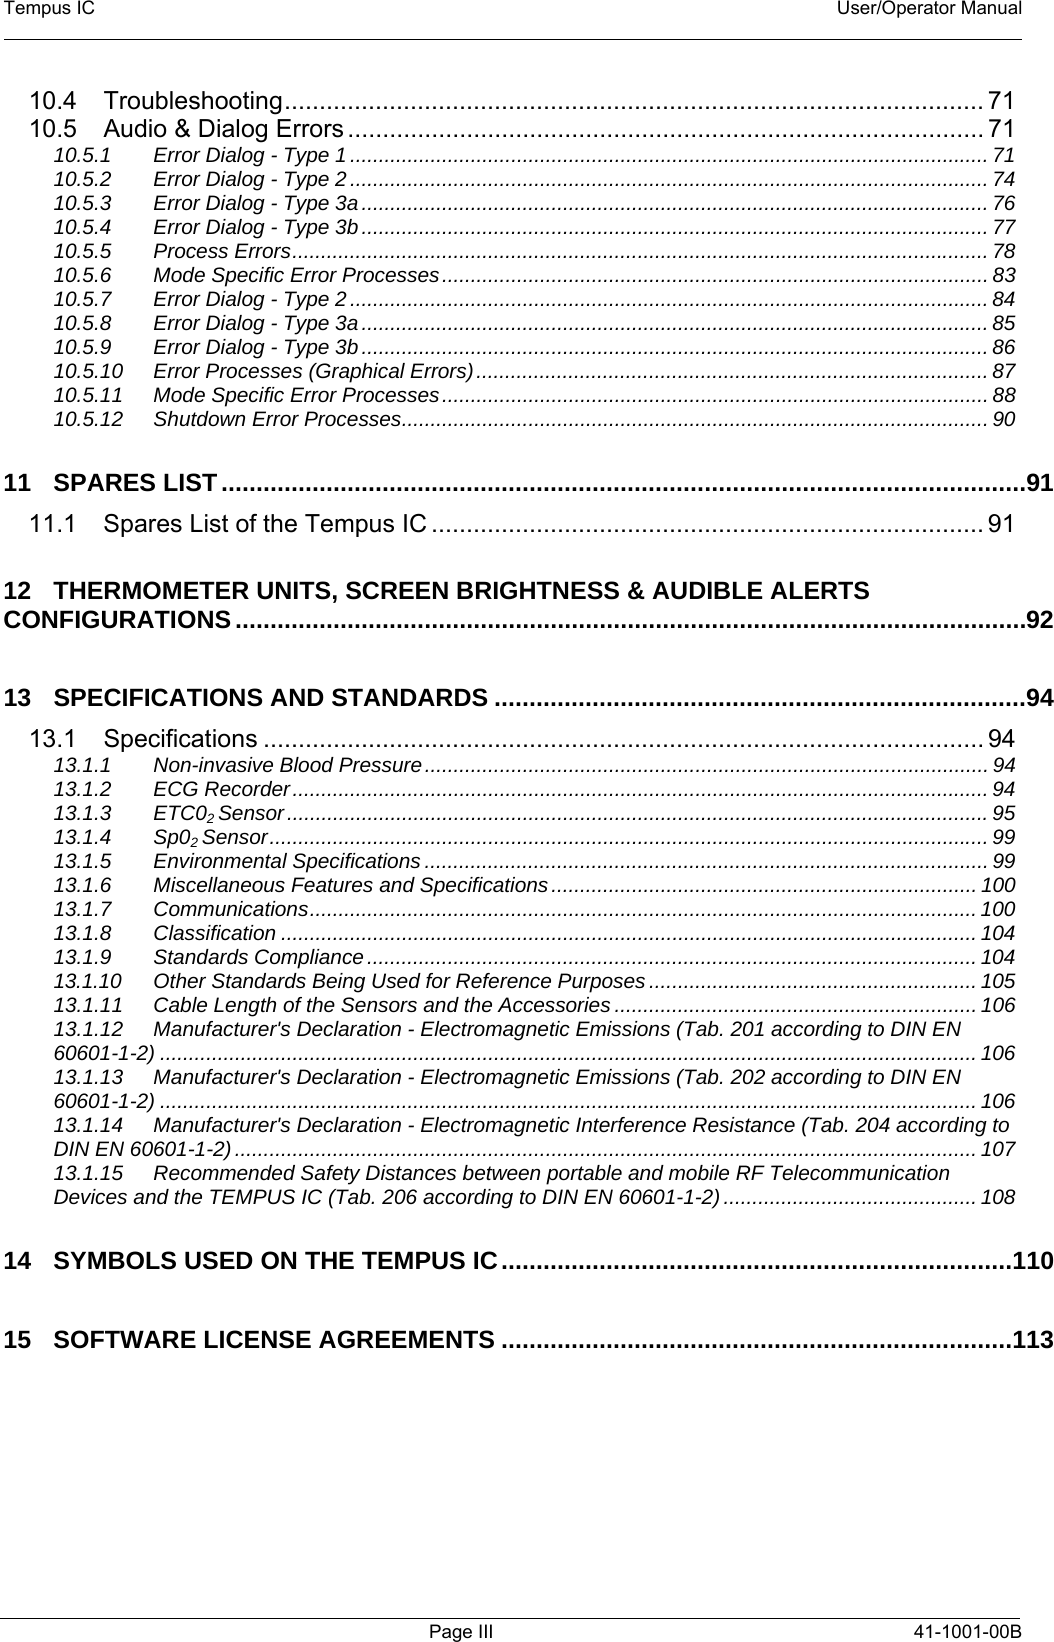 Tempus IC    User/Operator Manual     Page III 41-1001-00B 10.4 Troubleshooting.................................................................................................... 71 10.5 Audio &amp; Dialog Errors ........................................................................................... 71 10.5.1 Error Dialog - Type 1............................................................................................................... 71 10.5.2 Error Dialog - Type 2............................................................................................................... 74 10.5.3 Error Dialog - Type 3a............................................................................................................. 76 10.5.4 Error Dialog - Type 3b............................................................................................................. 77 10.5.5 Process Errors......................................................................................................................... 78 10.5.6 Mode Specific Error Processes............................................................................................... 83 10.5.7 Error Dialog - Type 2............................................................................................................... 84 10.5.8 Error Dialog - Type 3a............................................................................................................. 85 10.5.9 Error Dialog - Type 3b............................................................................................................. 86 10.5.10 Error Processes (Graphical Errors)......................................................................................... 87 10.5.11 Mode Specific Error Processes............................................................................................... 88 10.5.12 Shutdown Error Processes...................................................................................................... 90 11 SPARES LIST...................................................................................................................91 11.1 Spares List of the Tempus IC ............................................................................... 91 12 THERMOMETER UNITS, SCREEN BRIGHTNESS &amp; AUDIBLE ALERTS CONFIGURATIONS.................................................................................................................92 13 SPECIFICATIONS AND STANDARDS ............................................................................94 13.1 Specifications ....................................................................................................... 94 13.1.1 Non-invasive Blood Pressure.................................................................................................. 94 13.1.2 ECG Recorder......................................................................................................................... 94 13.1.3 ETC02 Sensor..........................................................................................................................95 13.1.4 Sp02 Sensor............................................................................................................................. 99 13.1.5 Environmental Specifications .................................................................................................. 99 13.1.6 Miscellaneous Features and Specifications .......................................................................... 100 13.1.7 Communications.................................................................................................................... 100 13.1.8 Classification ......................................................................................................................... 104 13.1.9 Standards Compliance.......................................................................................................... 104 13.1.10 Other Standards Being Used for Reference Purposes ......................................................... 105 13.1.11 Cable Length of the Sensors and the Accessories ............................................................... 106 13.1.12 Manufacturer&apos;s Declaration - Electromagnetic Emissions (Tab. 201 according to DIN EN 60601-1-2) .............................................................................................................................................. 106 13.1.13 Manufacturer&apos;s Declaration - Electromagnetic Emissions (Tab. 202 according to DIN EN 60601-1-2) .............................................................................................................................................. 106 13.1.14 Manufacturer&apos;s Declaration - Electromagnetic Interference Resistance (Tab. 204 according to DIN EN 60601-1-2)................................................................................................................................. 107 13.1.15 Recommended Safety Distances between portable and mobile RF Telecommunication Devices and the TEMPUS IC (Tab. 206 according to DIN EN 60601-1-2)............................................ 108 14 SYMBOLS USED ON THE TEMPUS IC.........................................................................110 15 SOFTWARE LICENSE AGREEMENTS .........................................................................113  